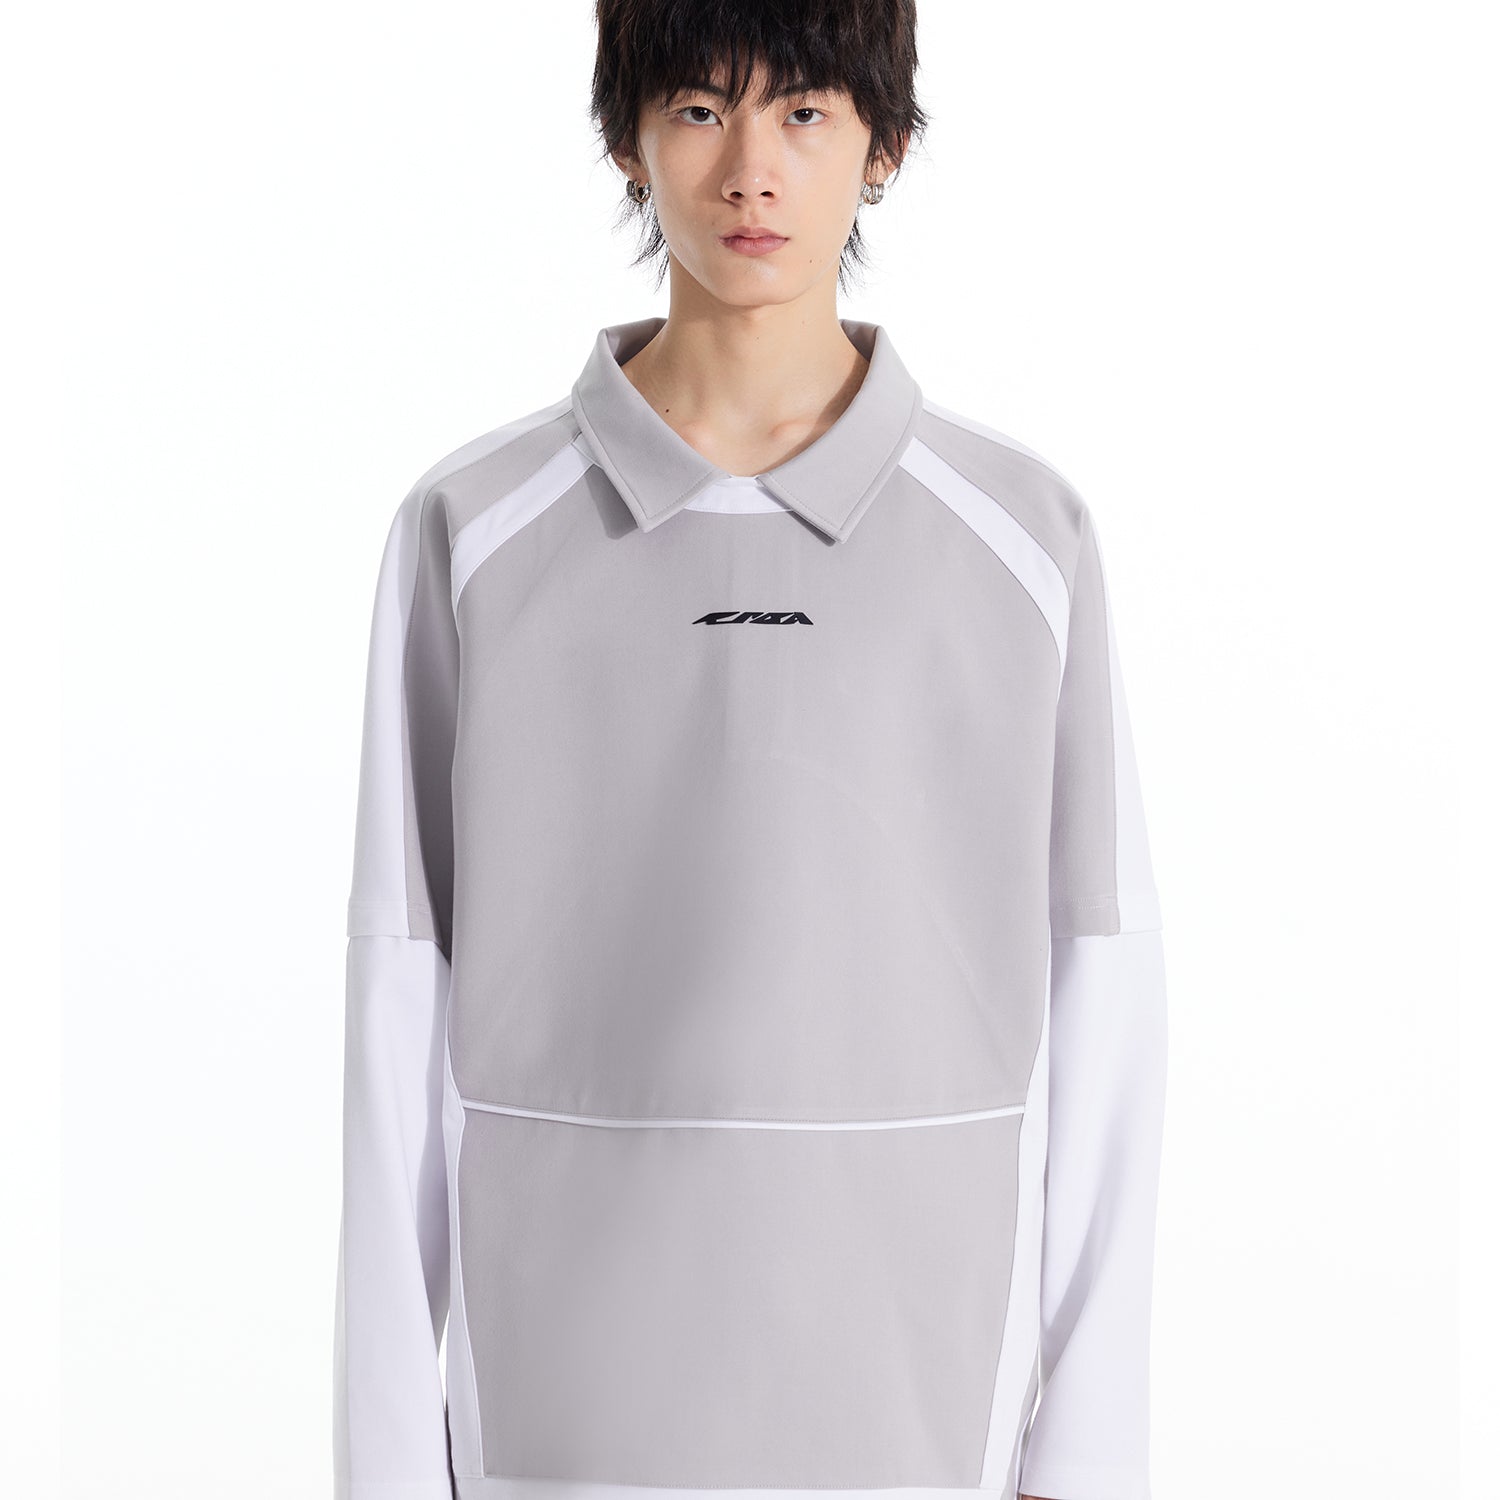 Autumn/Winter Two-Color Stitched POLO Sweater Casual All-Match